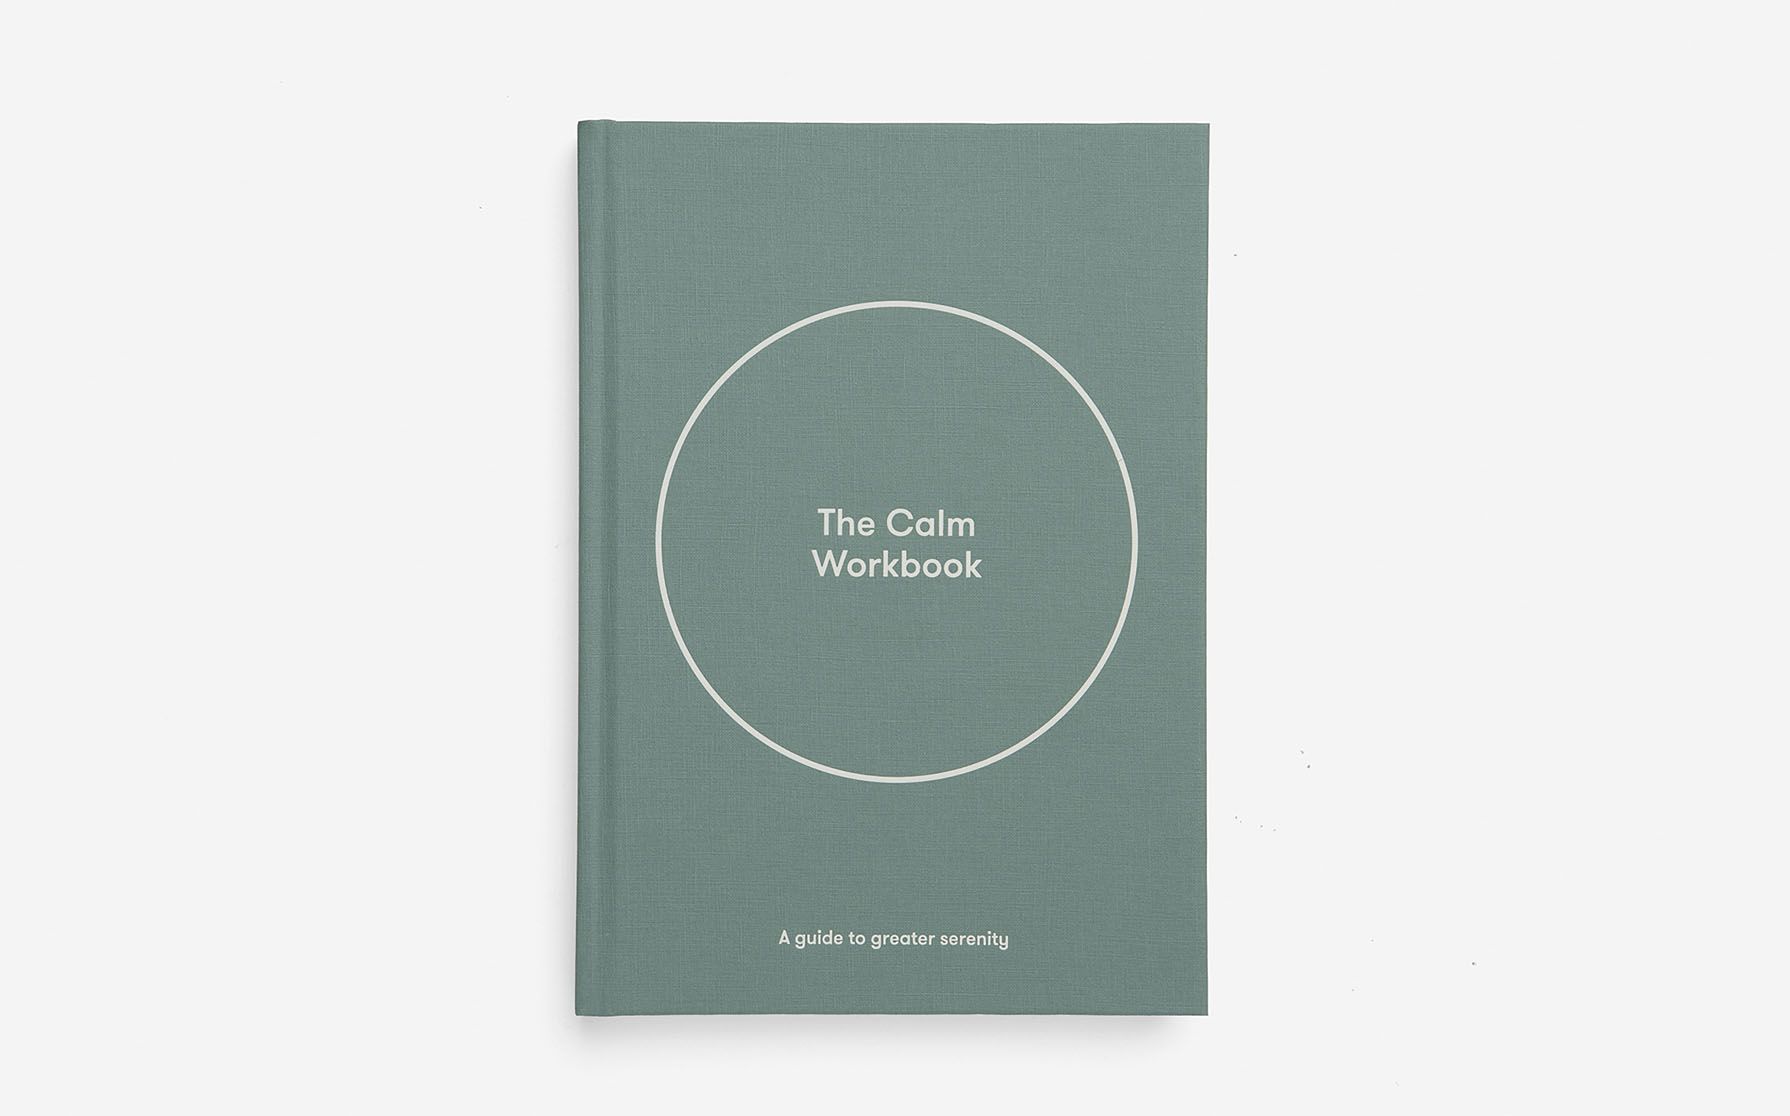 (ENG) The Calm Workbook / School of life